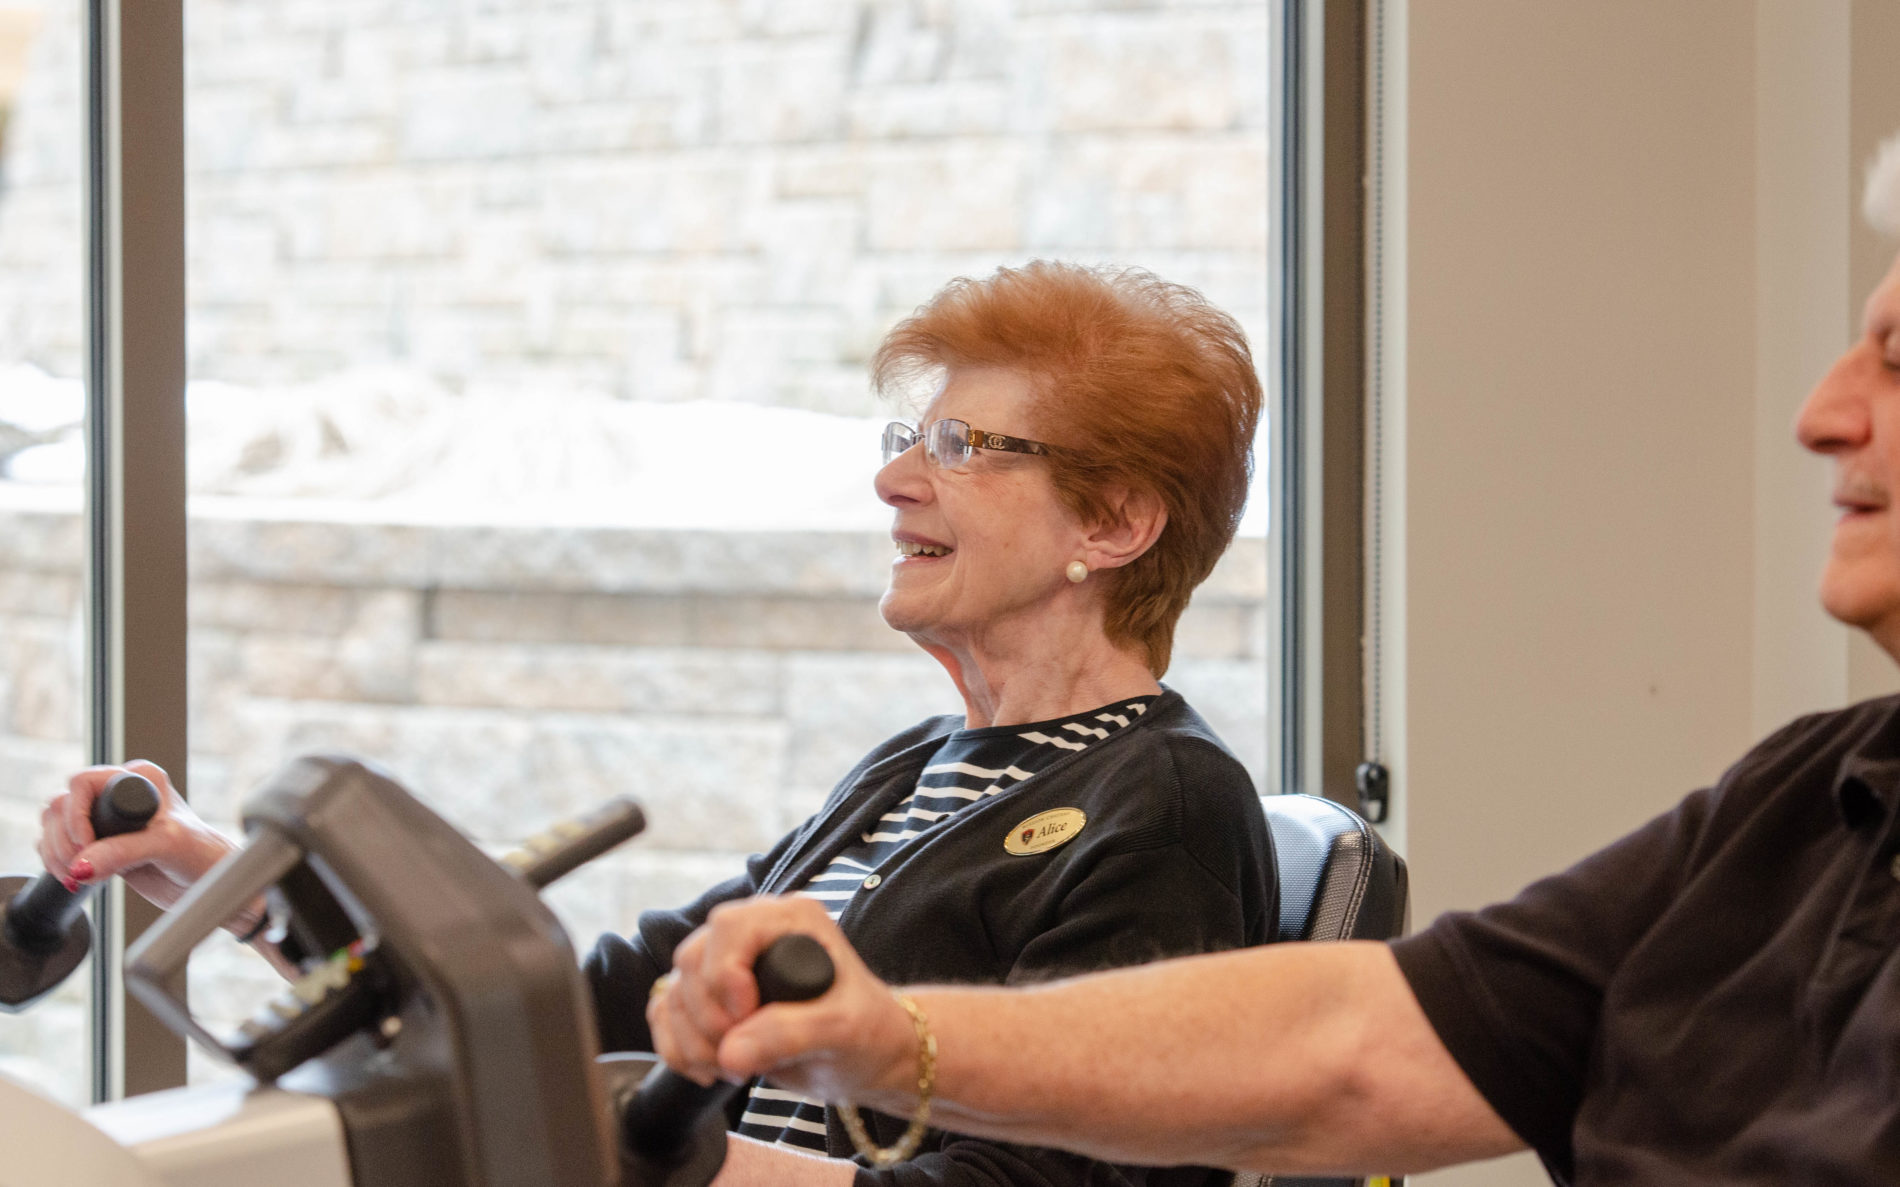 A resident enjoying the fitness area as she smiles while on a workout machine